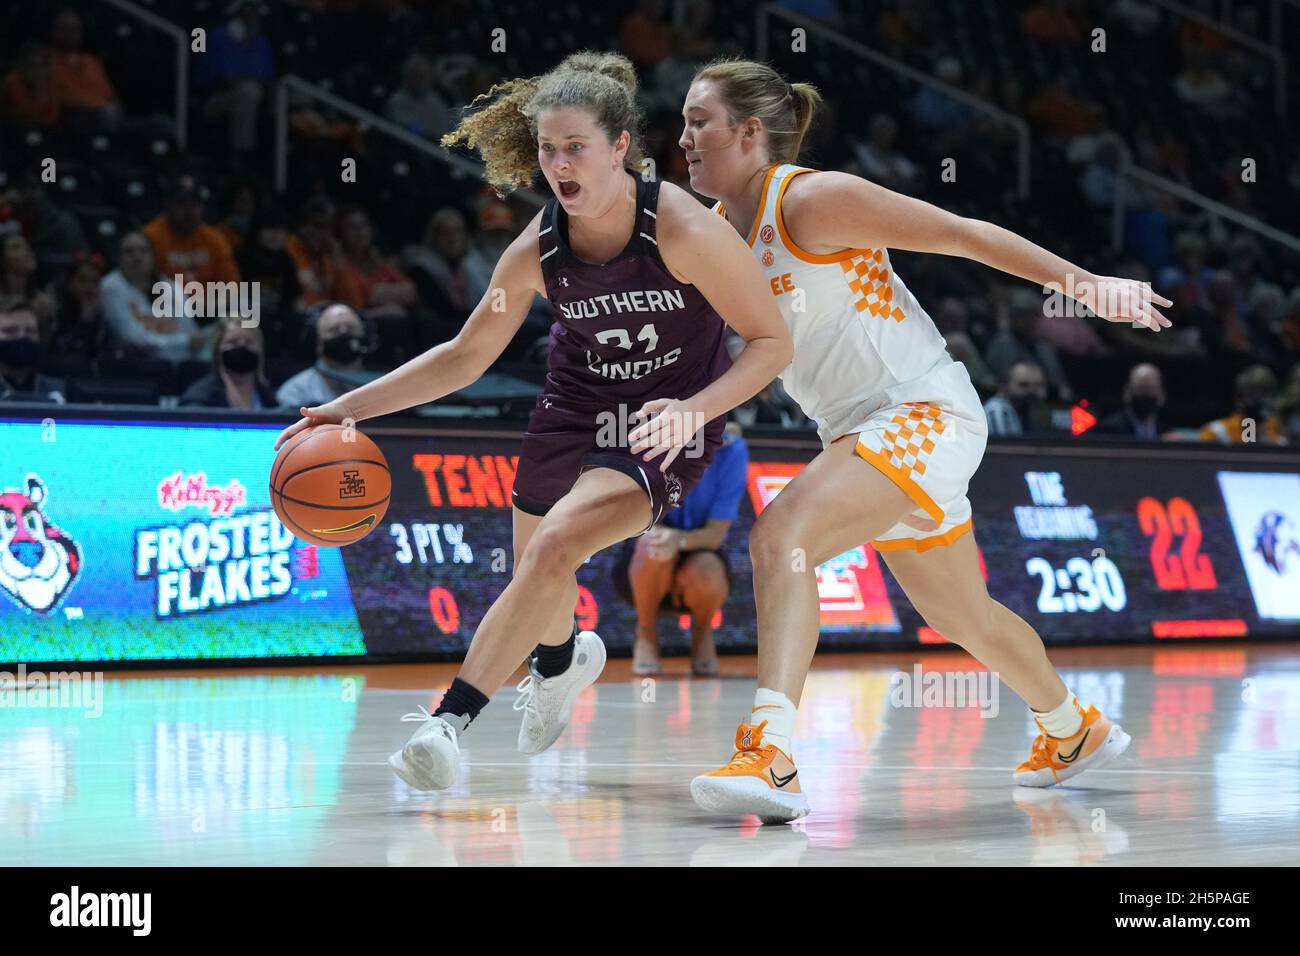 November 10, 2021: Payton McCallister #21 of the Southern Illinois Salukis  drives to the basket against Tess Darby #21 of the Tennessee Lady Vols  during the NCAA basketball game between the University